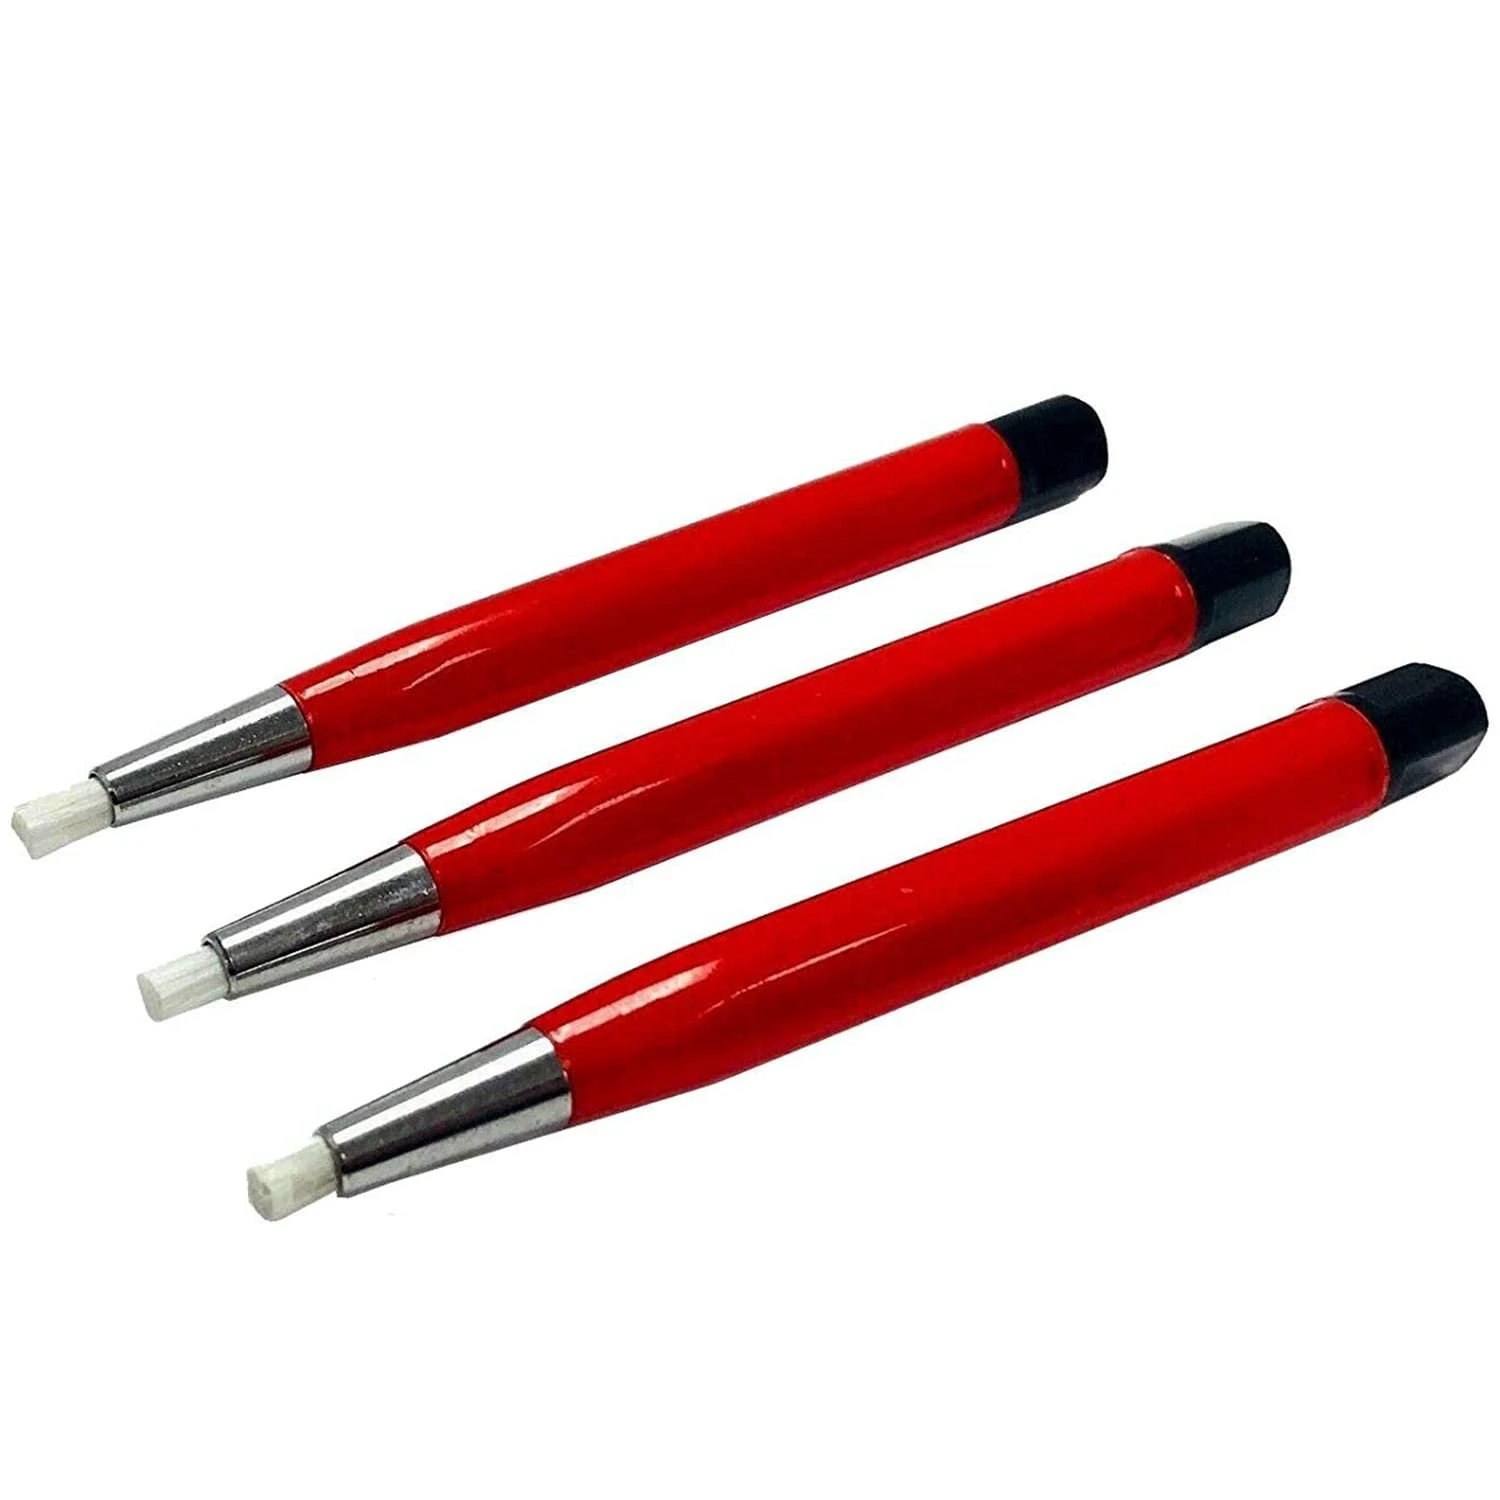 

Fiberglass Scratch Brush Pen 3Pcs Jewelry, Watch, Coin Cleaning, Electronic Applications, Removing Rust and Corrosion